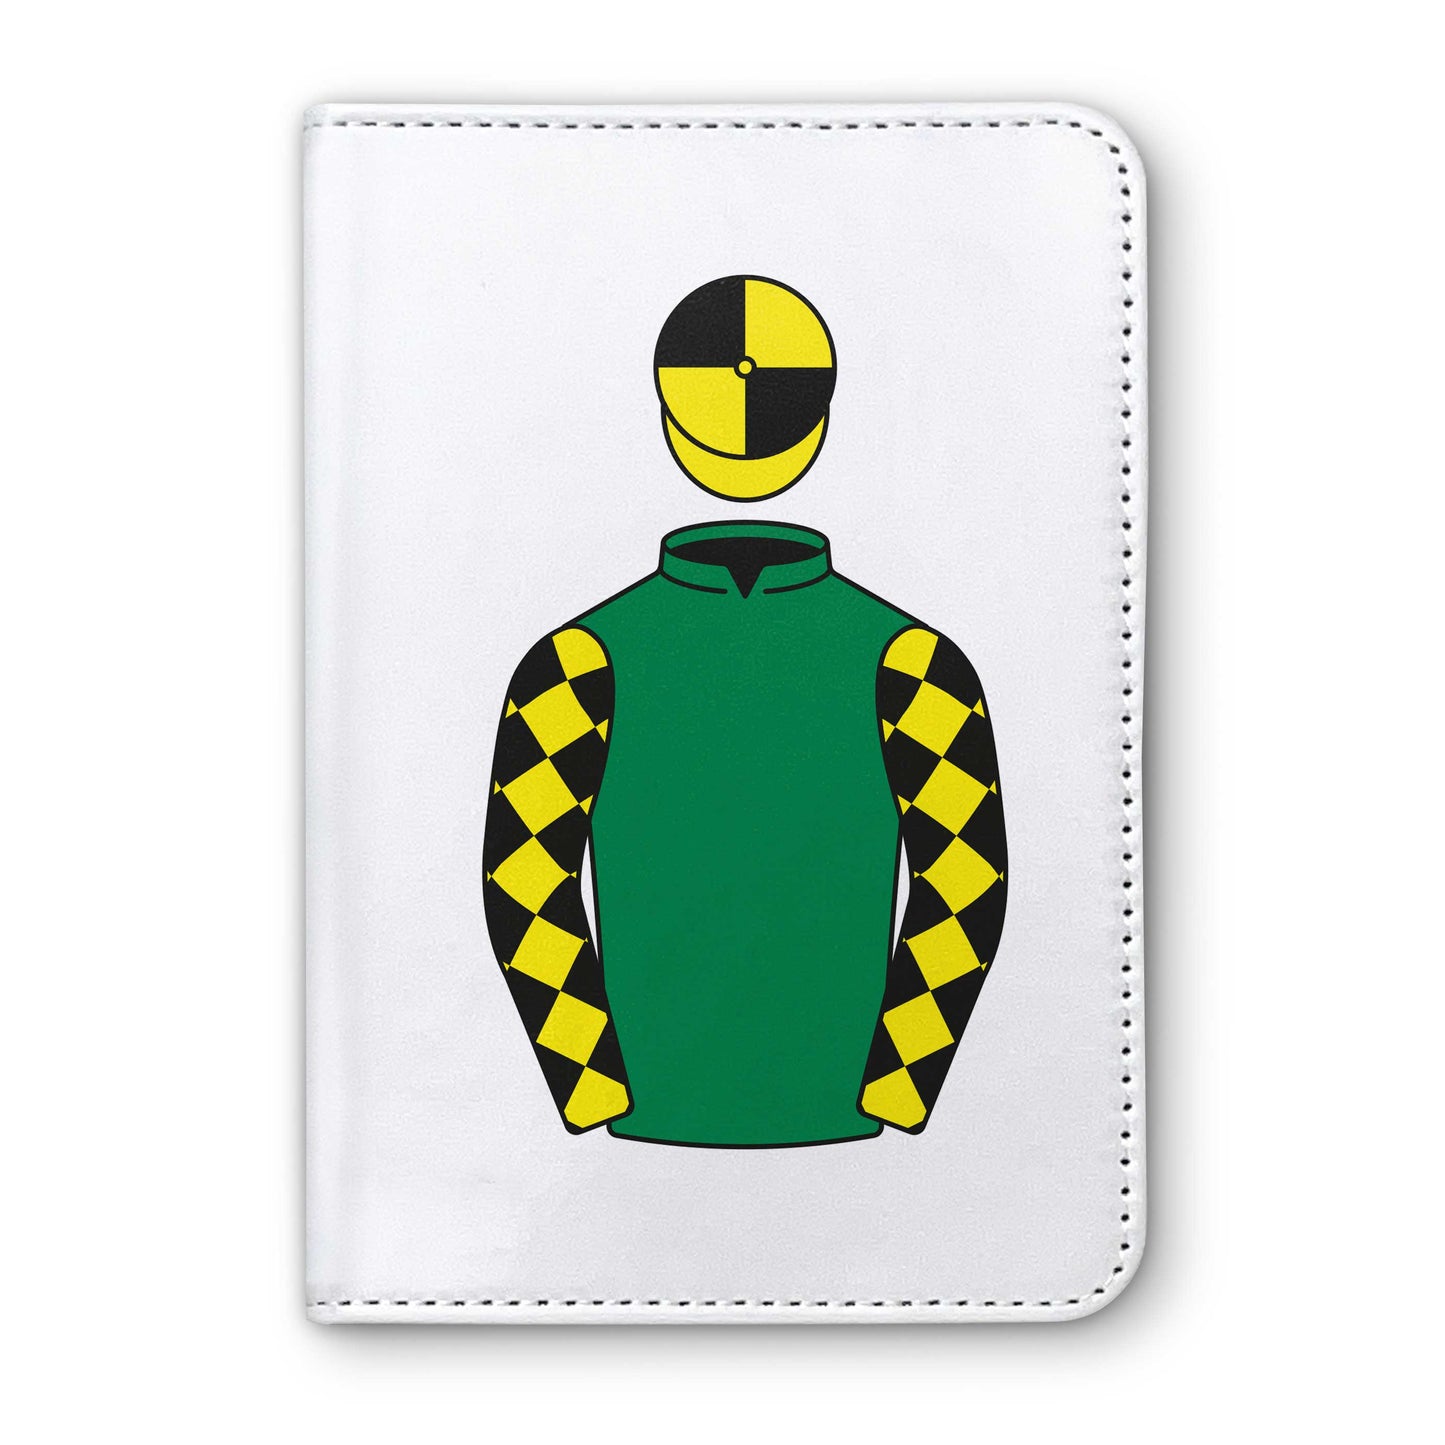 Racing For Fun Horse Racing Passport Holder - Hacked Up Horse Racing Gifts